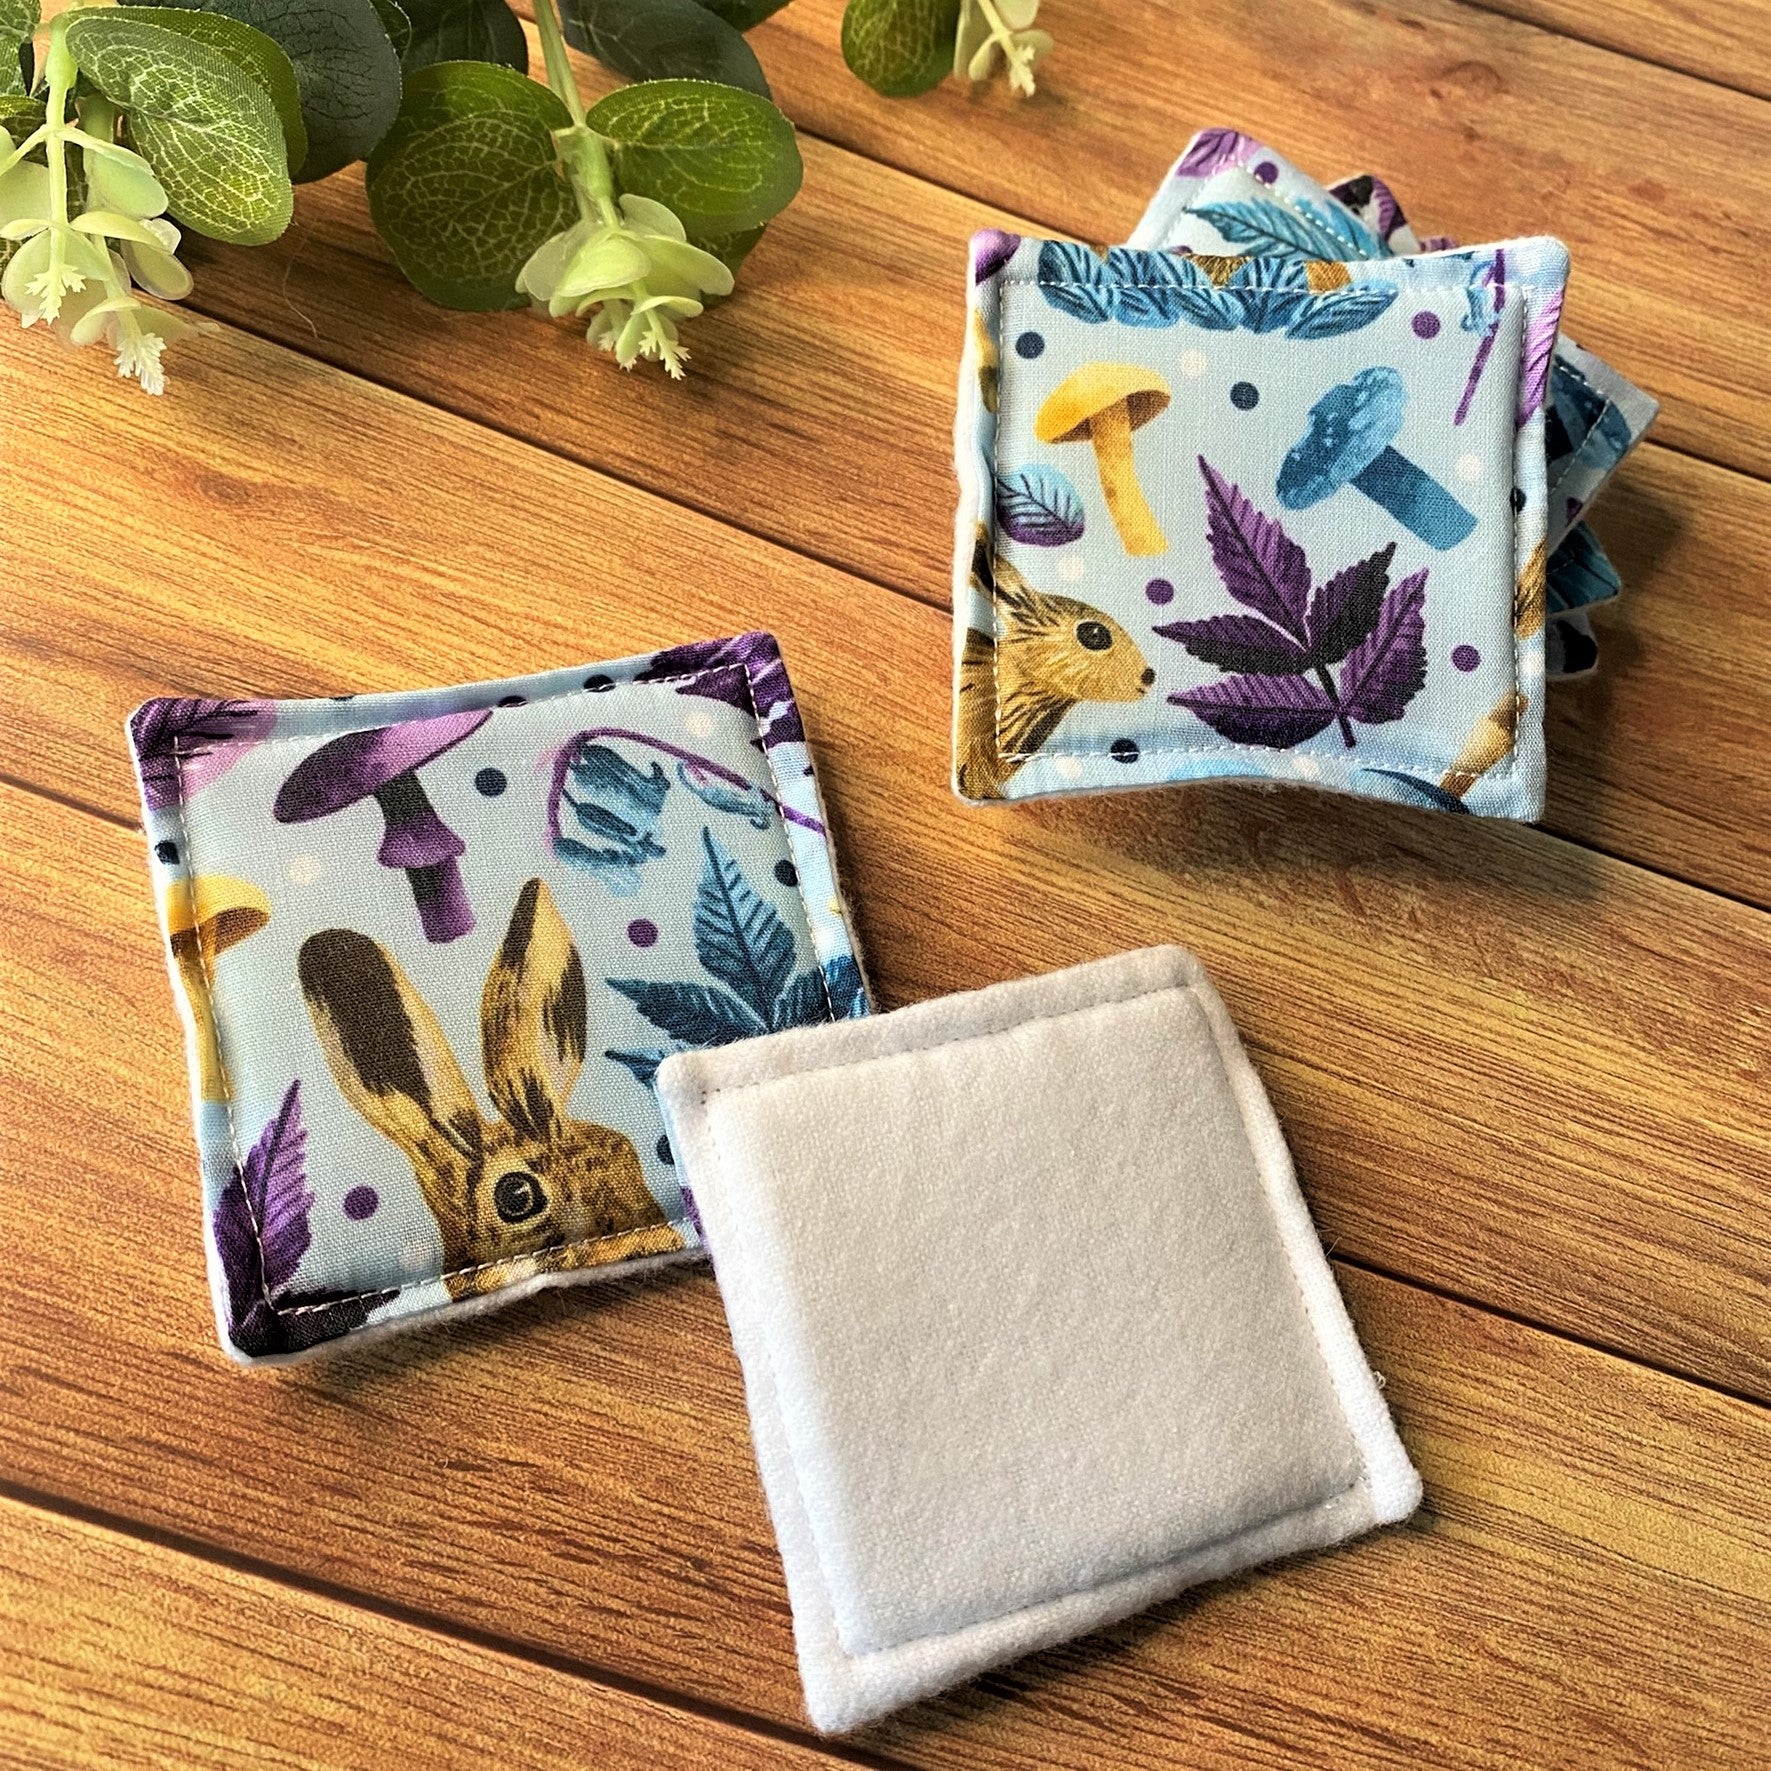 Hare patterned skincare pads on a wooden background